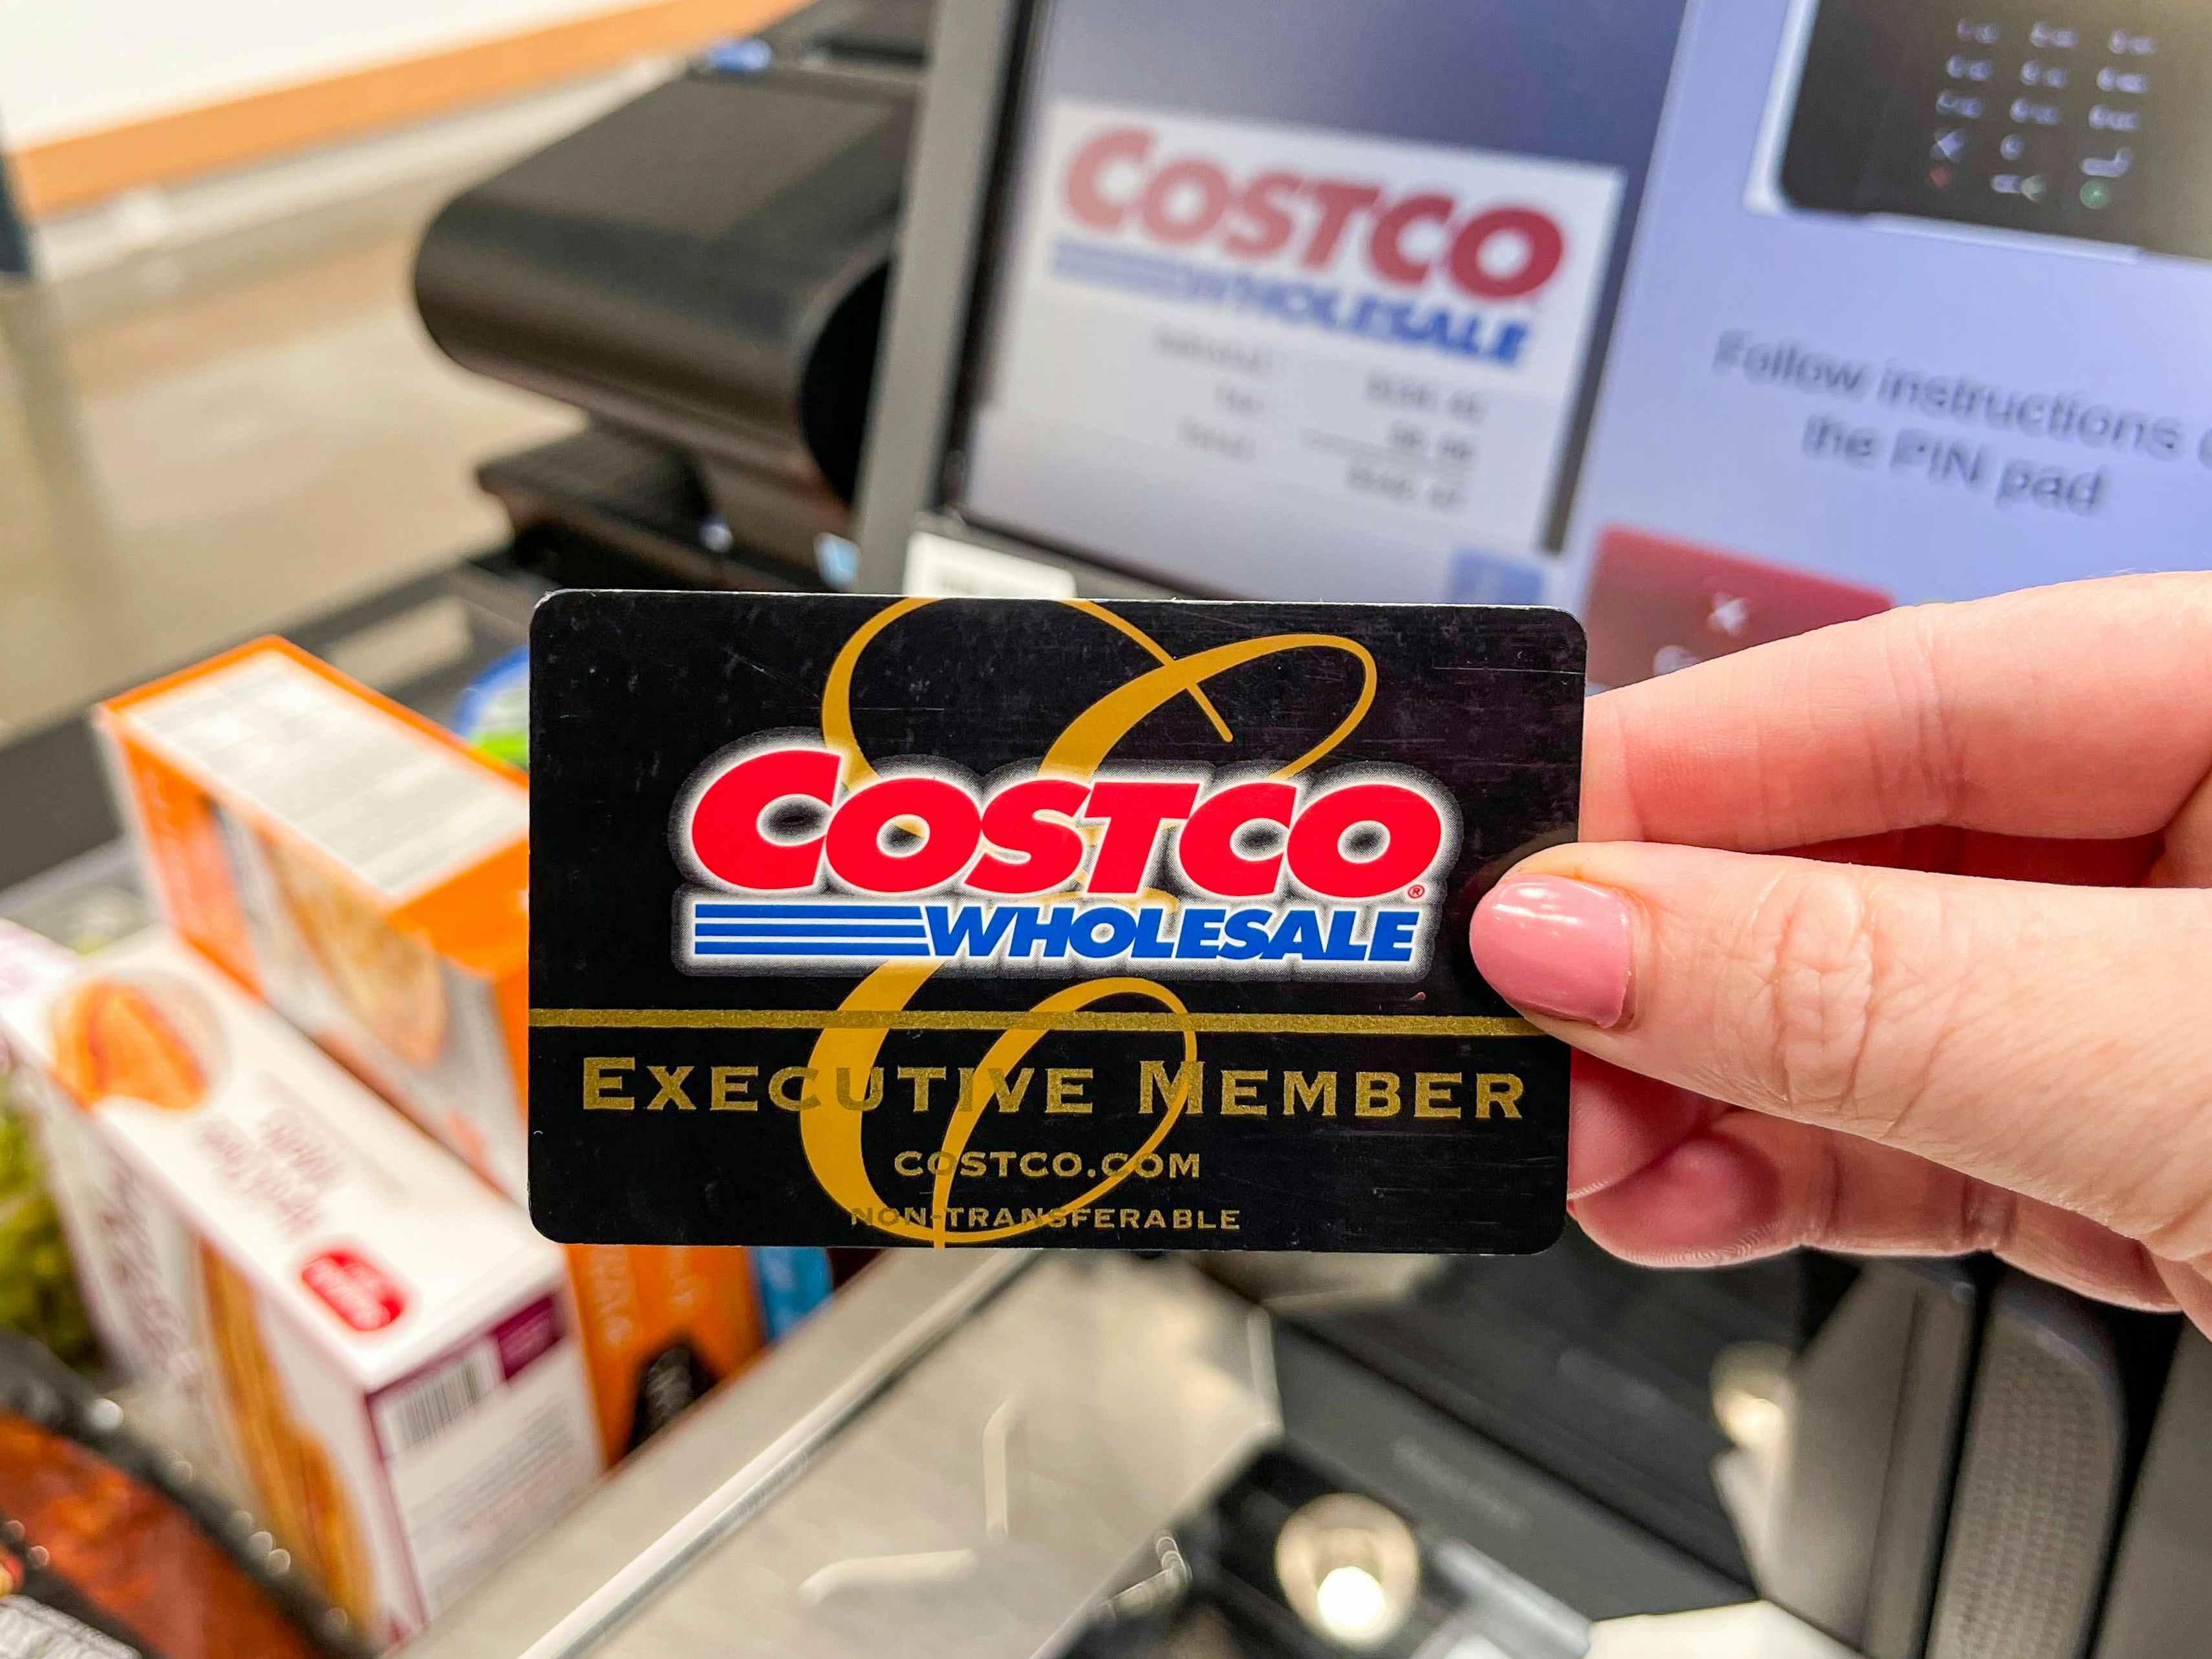 A person's hand holding up their Costco membership card in front of the self-checkout scanner at Costco.